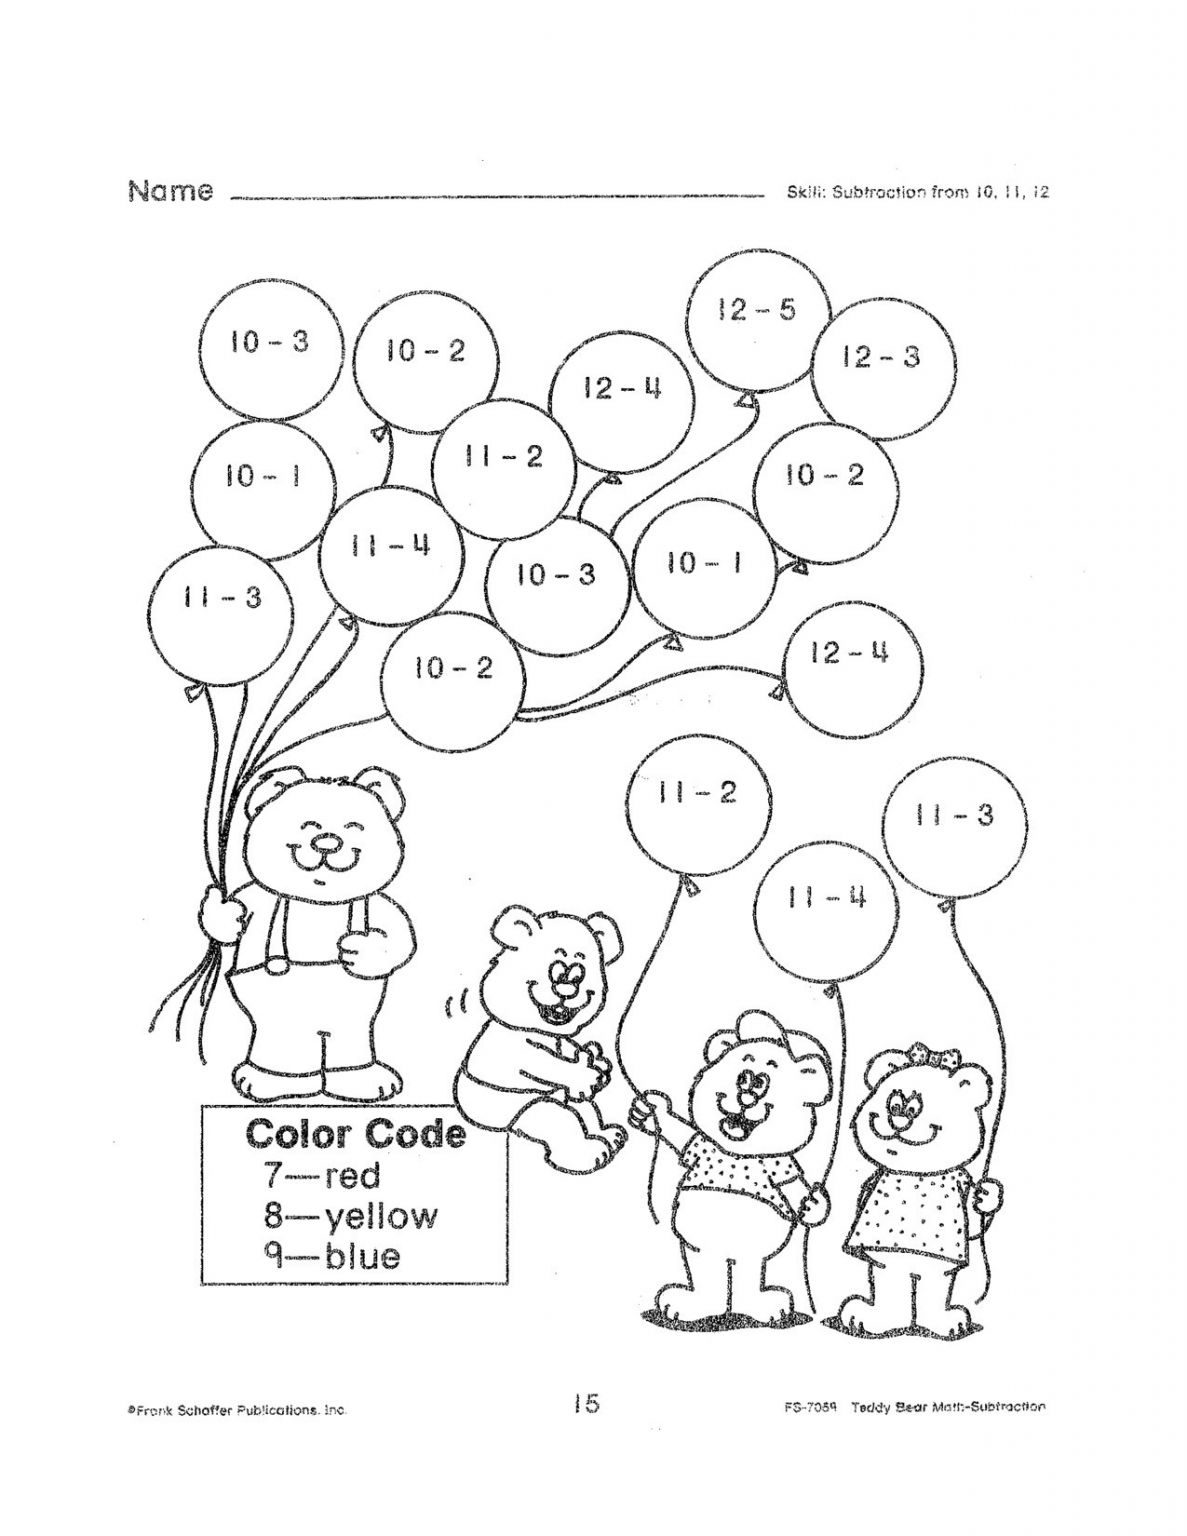 5-free-math-worksheets-second-grade-2-subtraction-subtraction-up-to-20